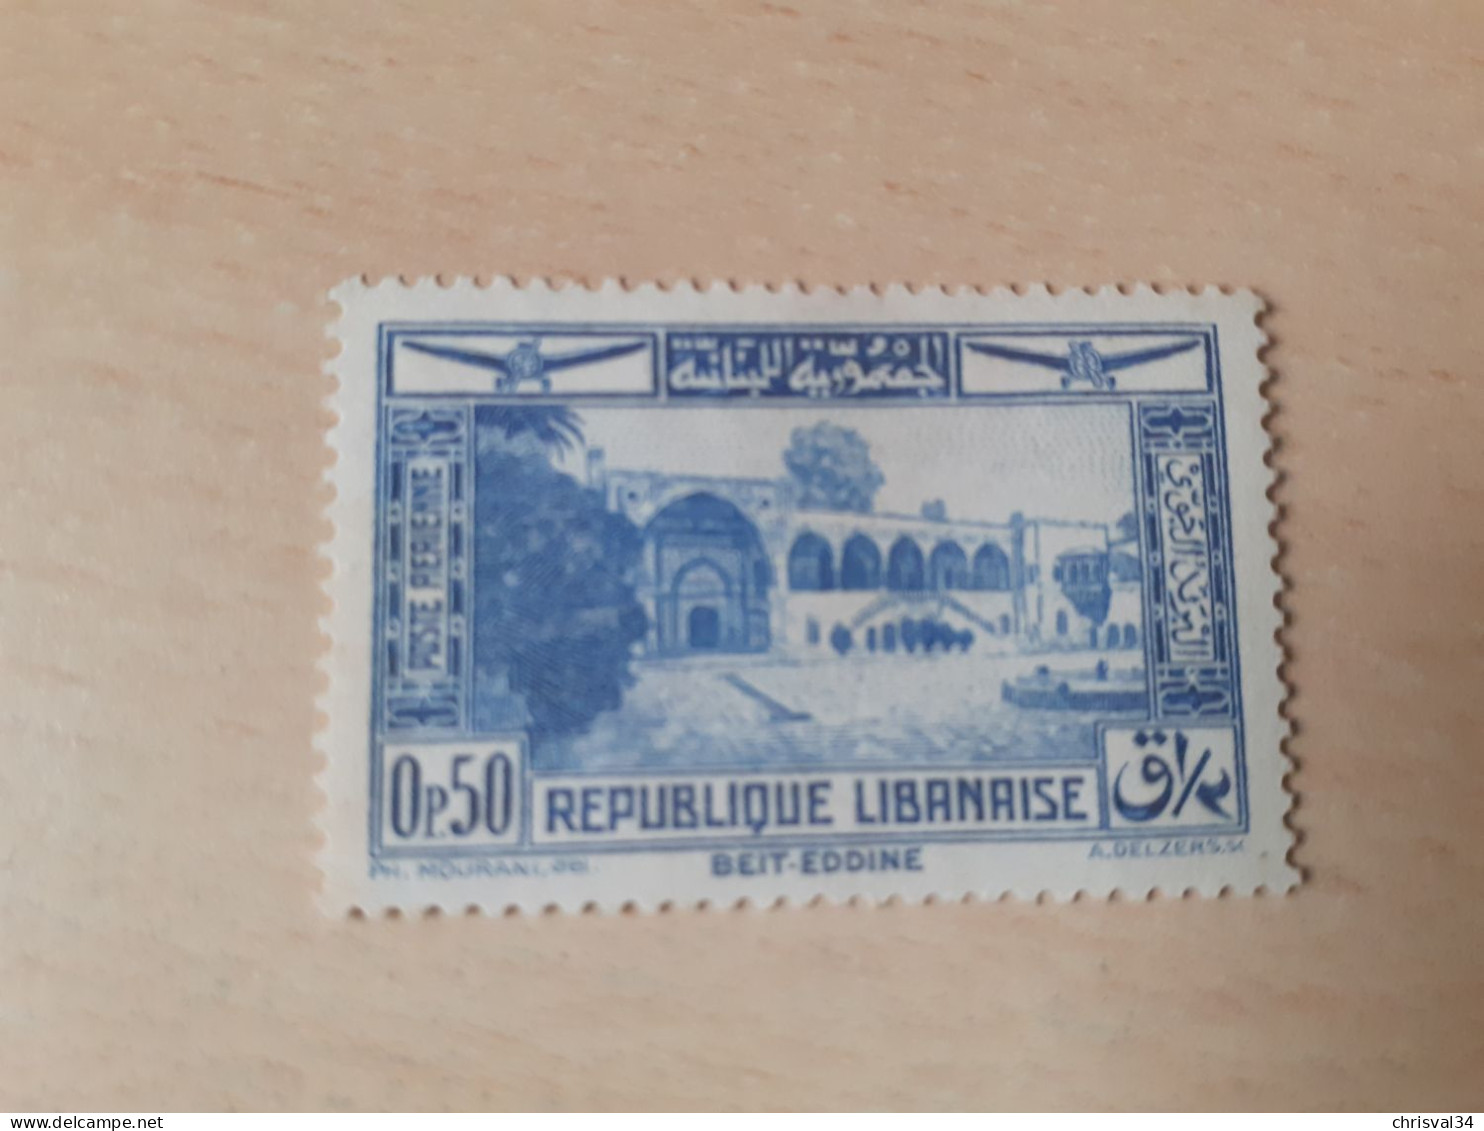 TIMBRE   GRAND  LIBAN    POSTE  AERIENNE   N  65      COTE  0,25  EUROS    NEUF  TRACE  CHARNIERE - Luftpost